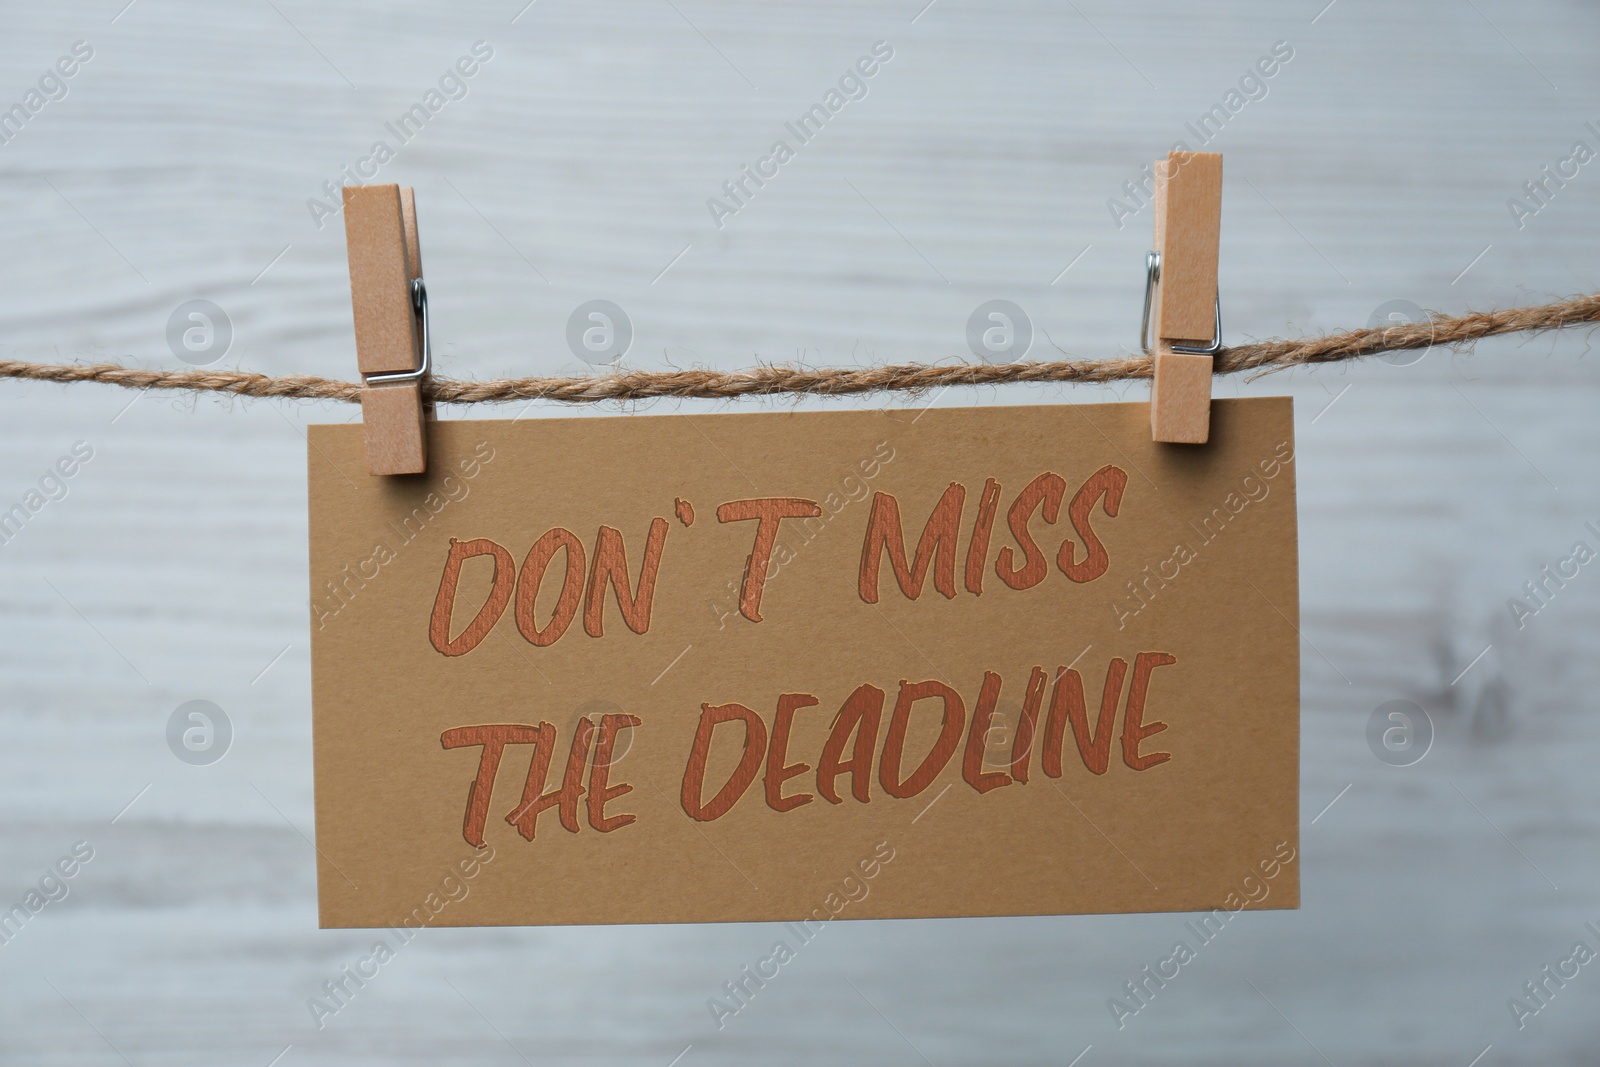 Image of Note with reminder Don't Miss The Deadline hanging on twine against light background